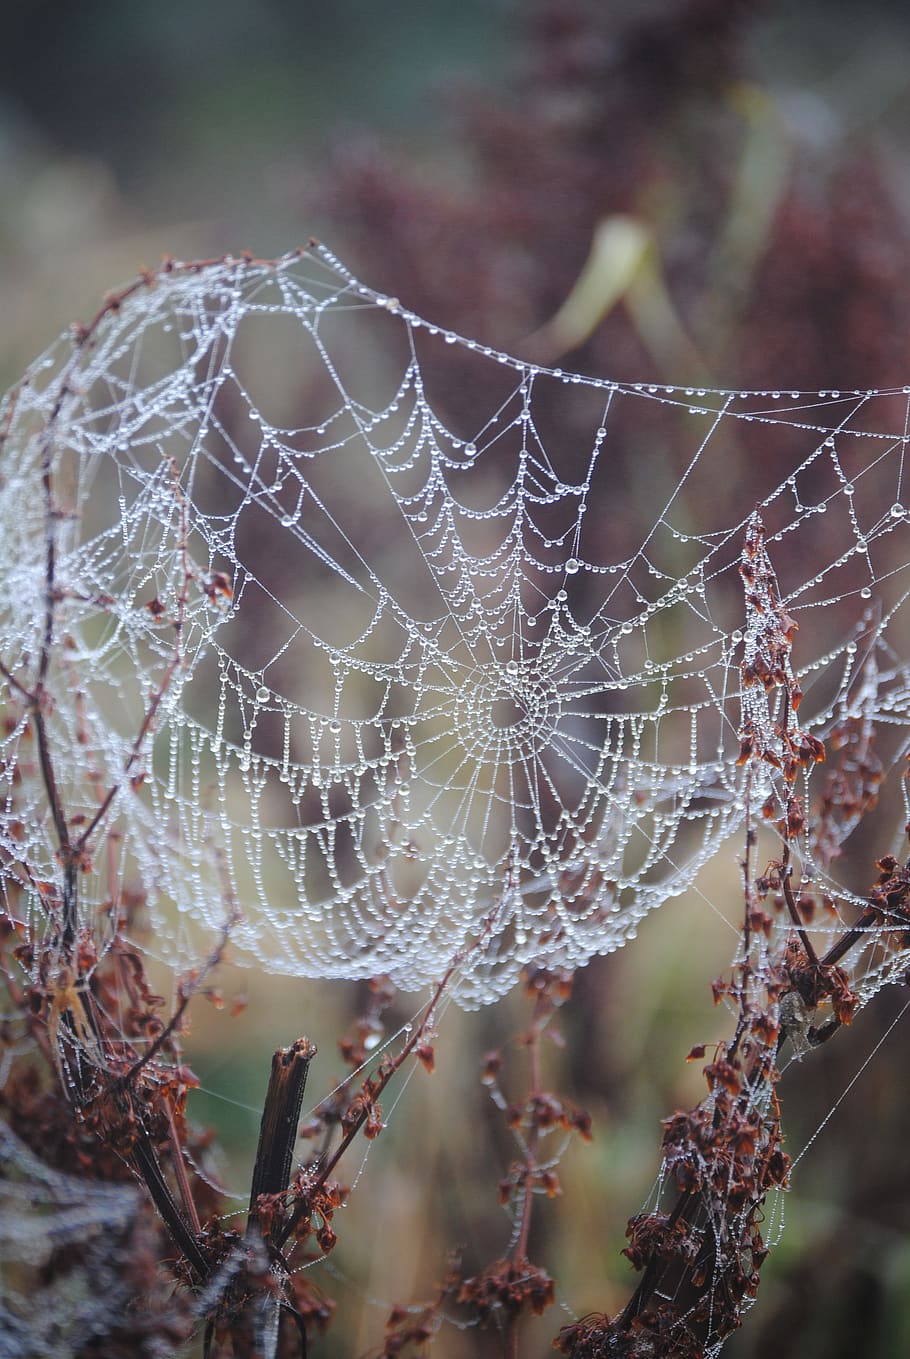 web, nature, insect, spiderweb, dew, drops, autumn, dewdrop, spider, fragility